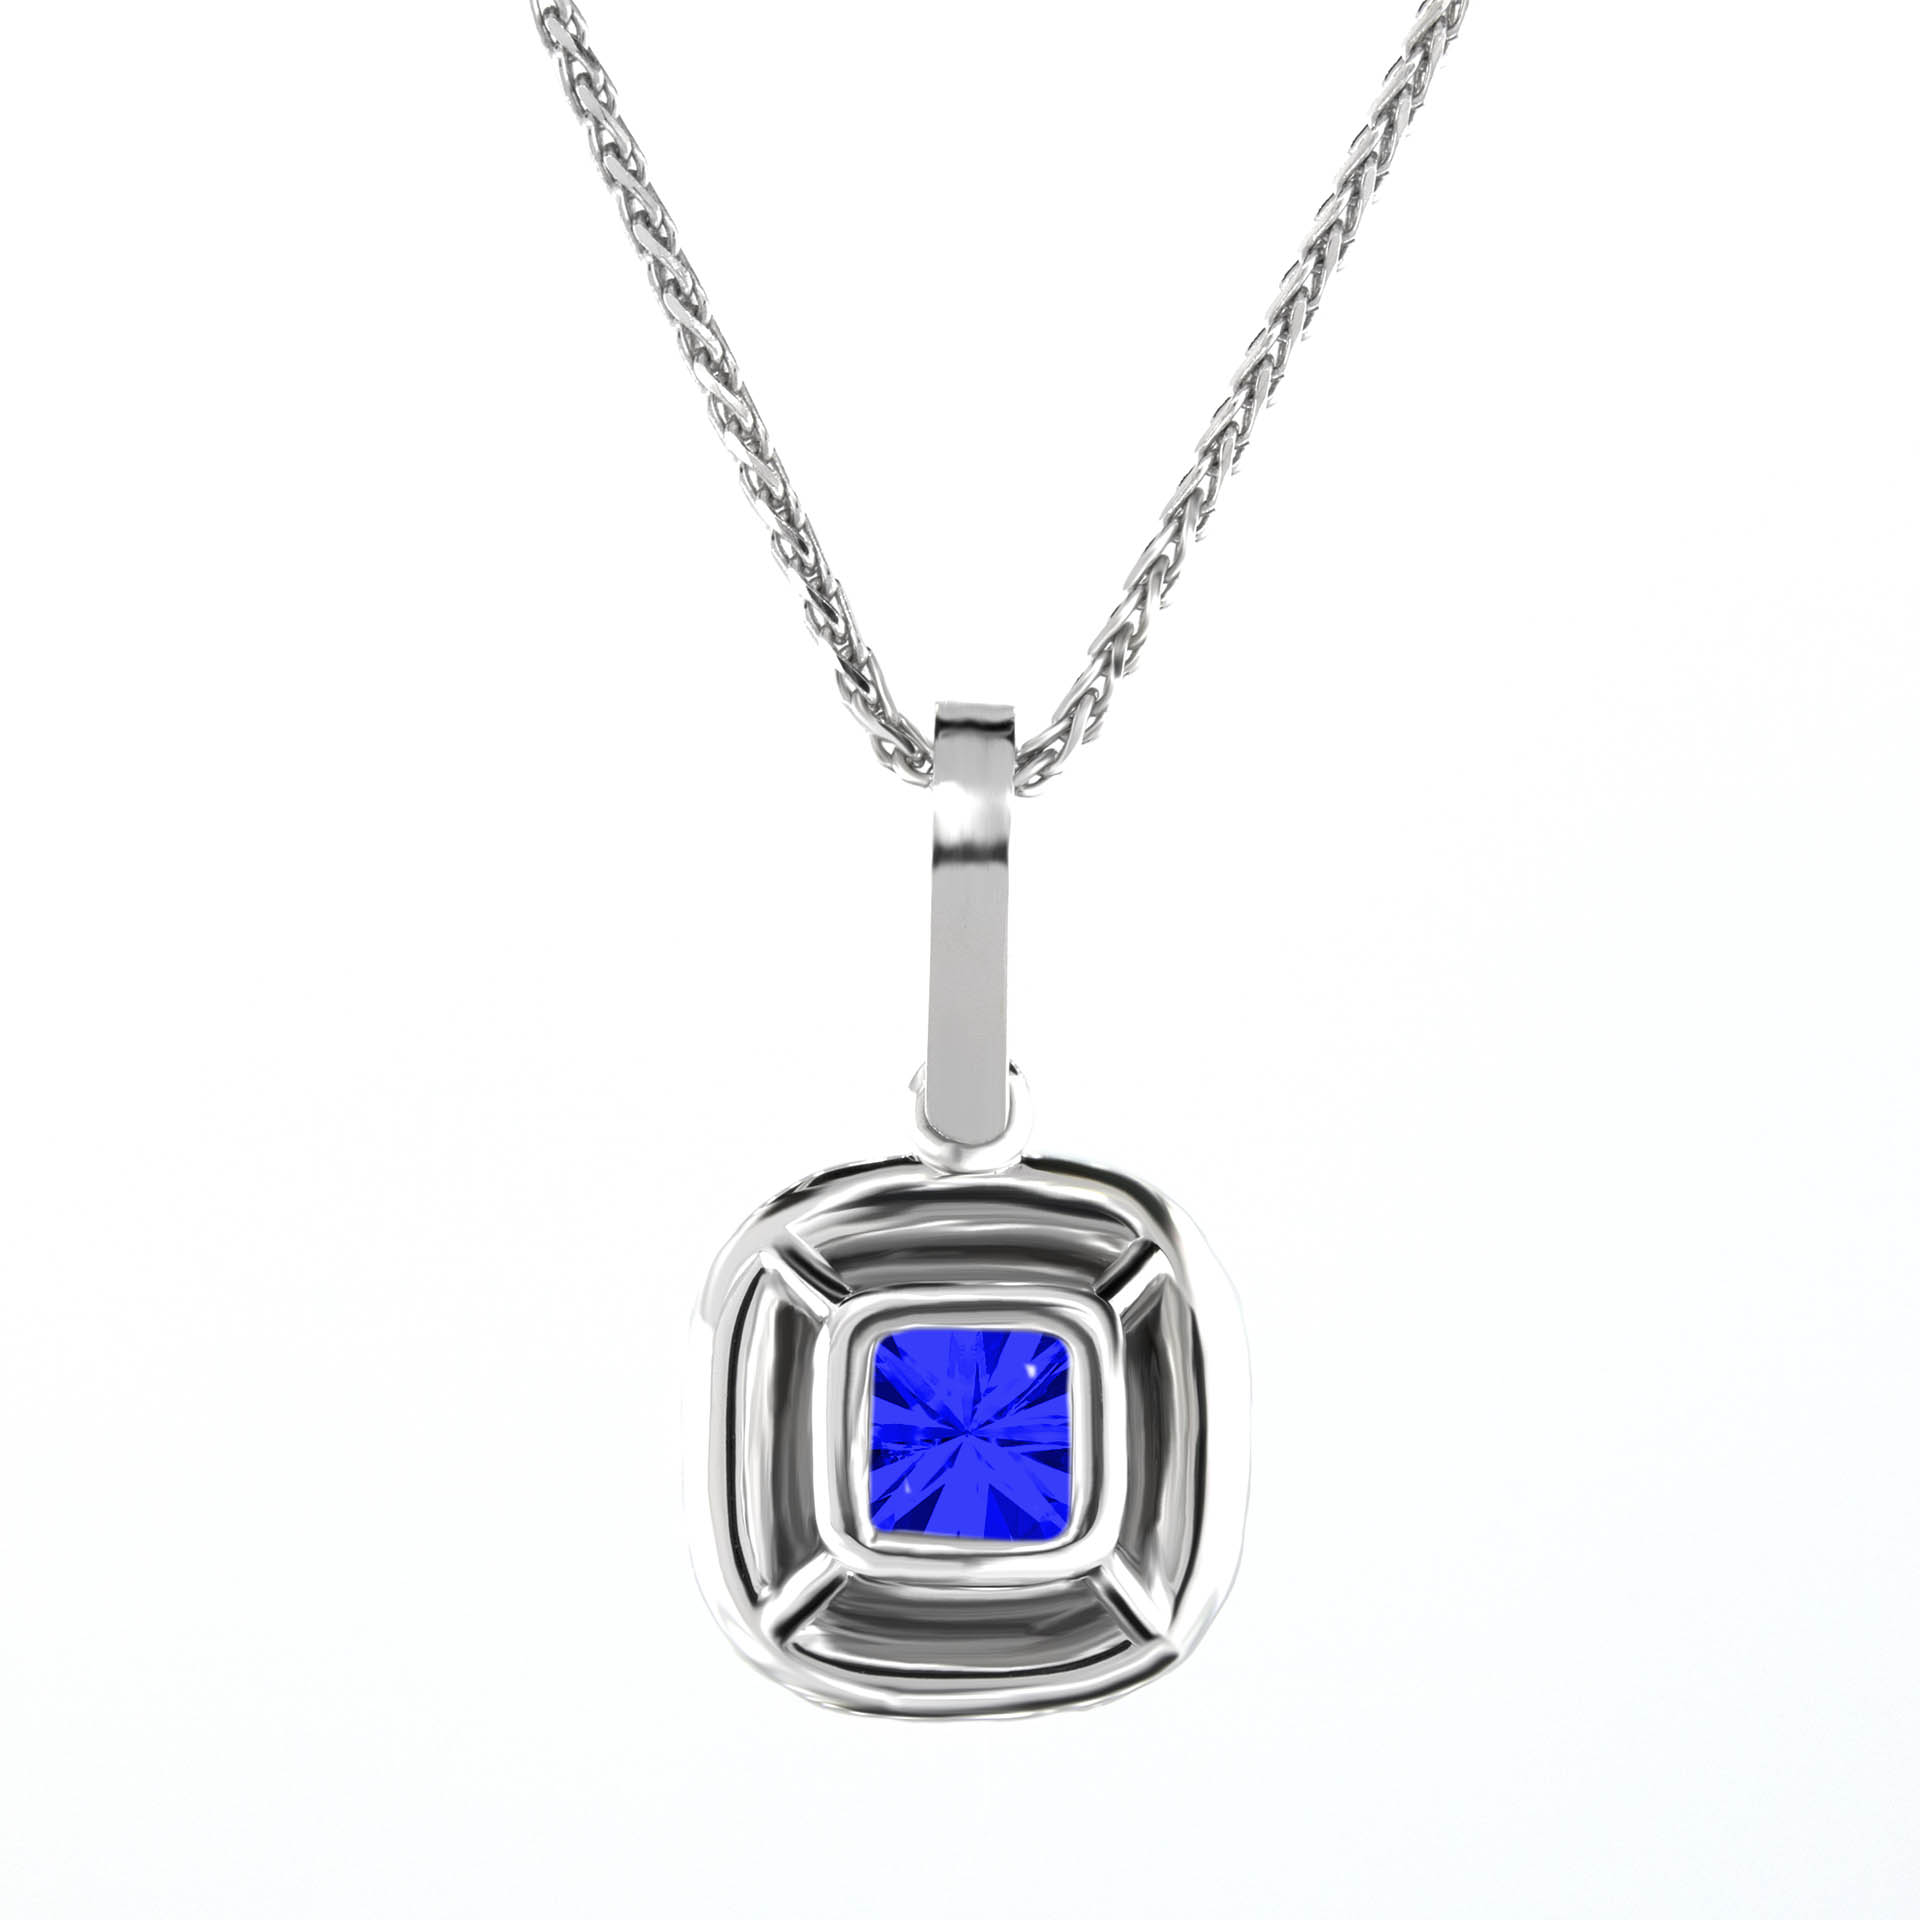 Round Blue Sapphire Solitaire Pendant Necklace Sterling Silver 1.60ct - V152